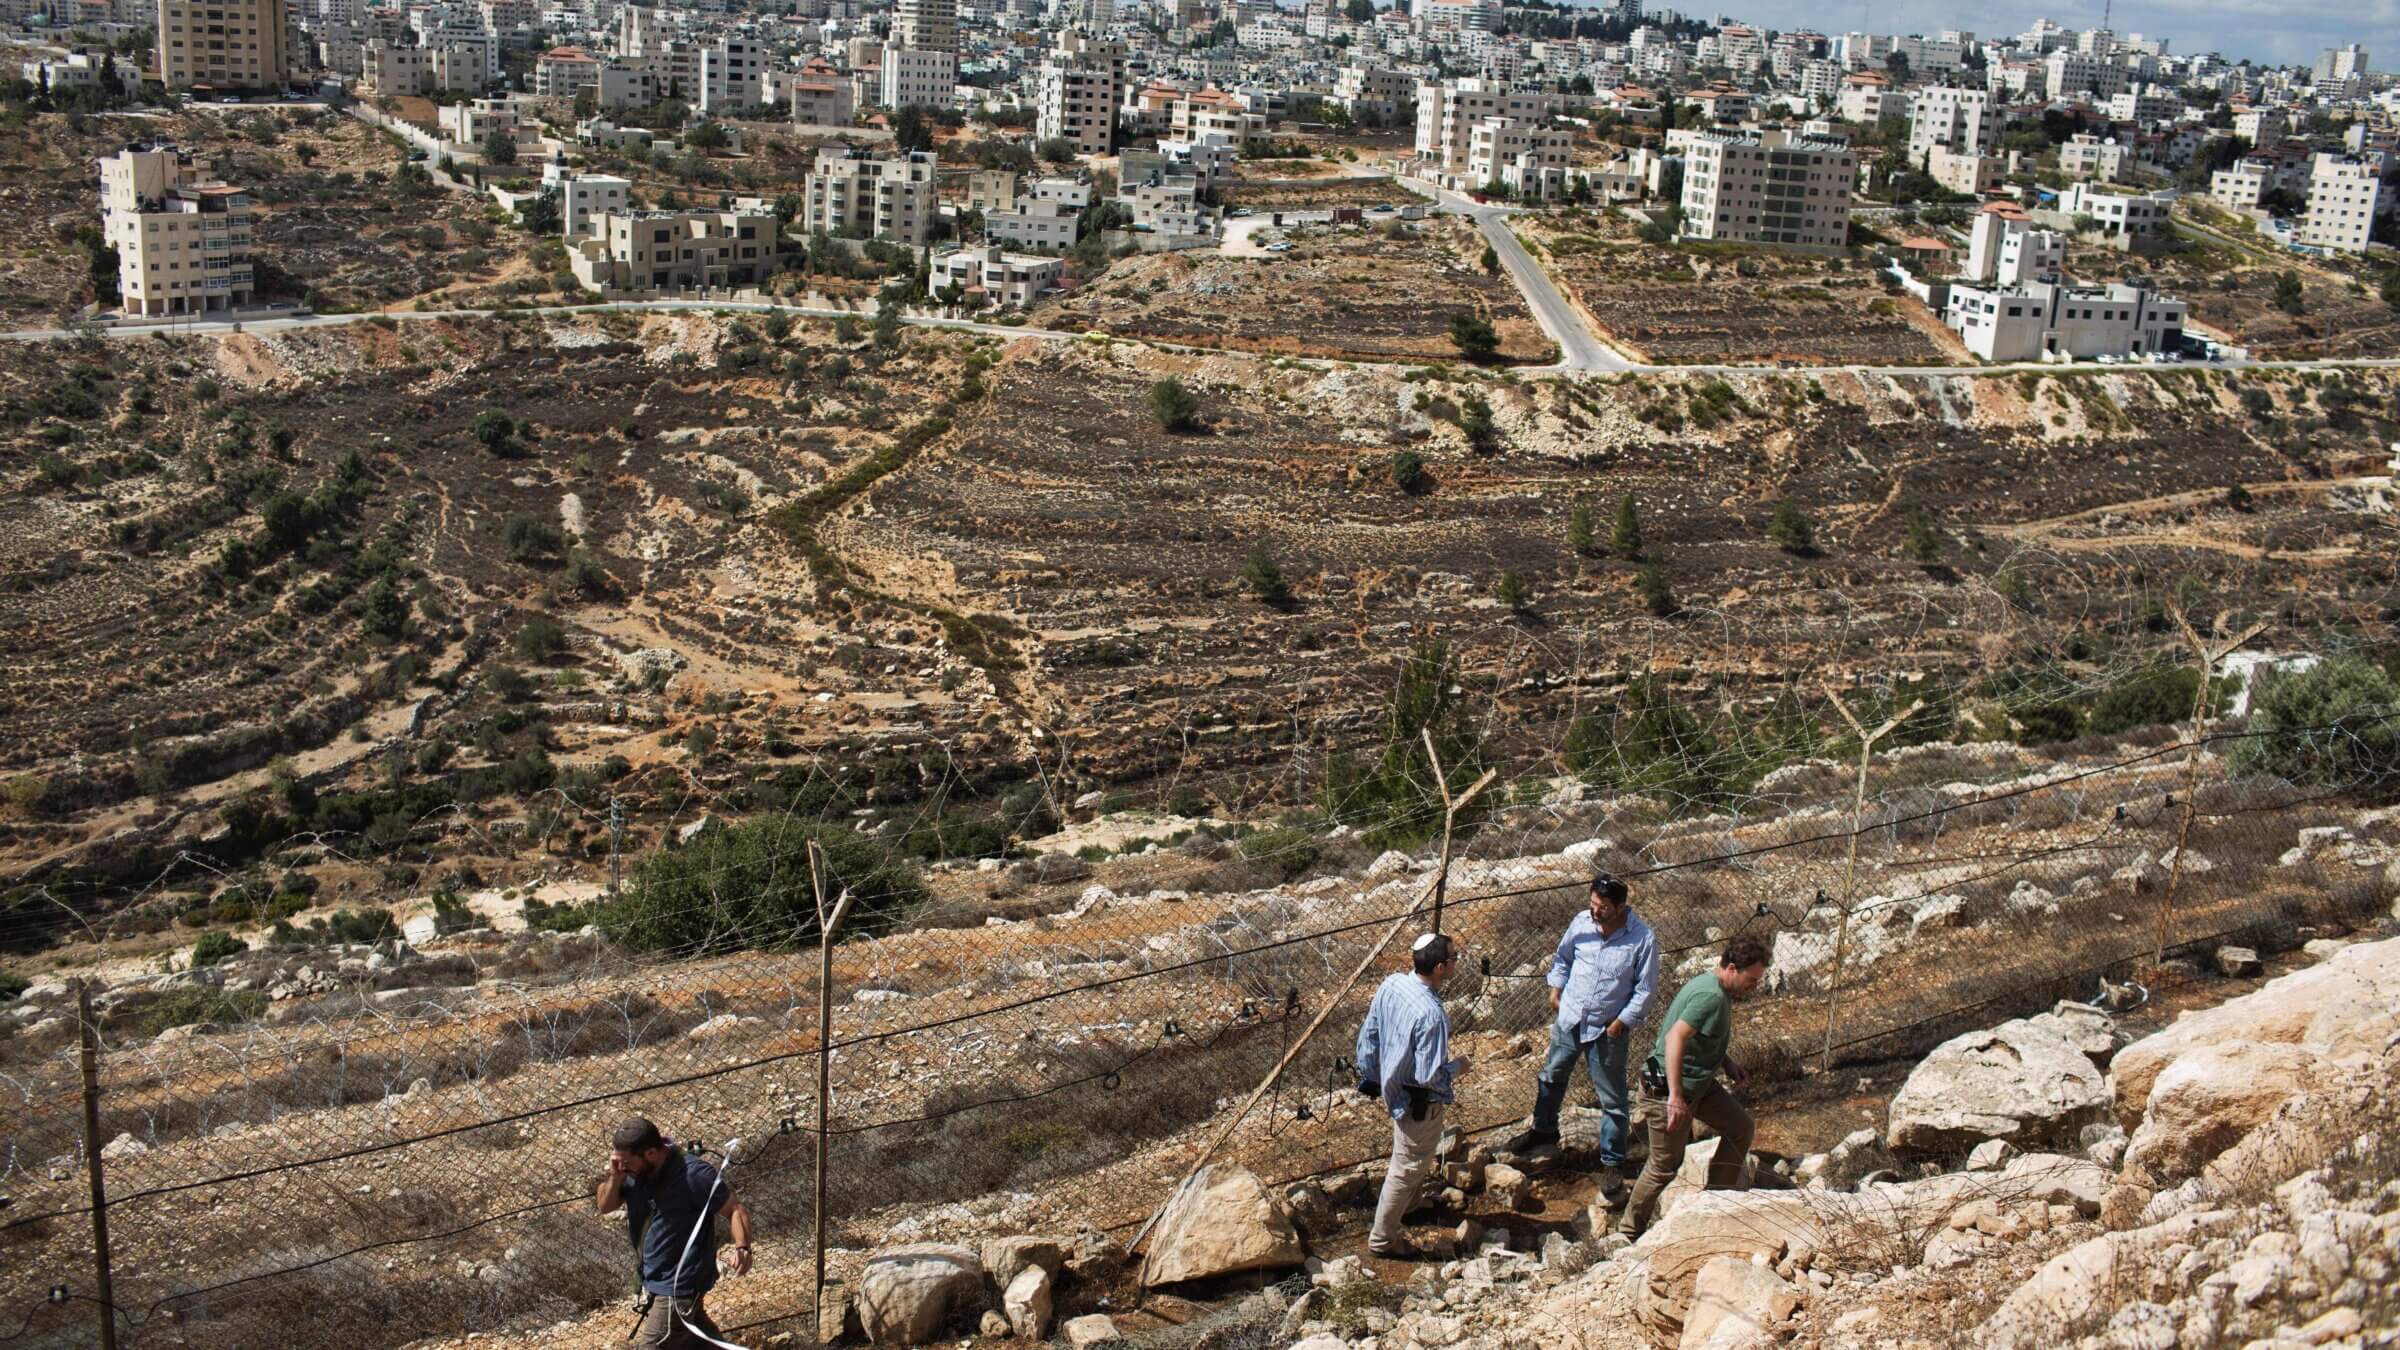 Armed Israeli settlers walk next to the fence between the Jewish settlement of Psagot and the Palestinian town of Al-Bireh in 2013. The Jewish Federations of North America and UJA-Federation sponsored a conference promoting Israel economic development in the West Bank.